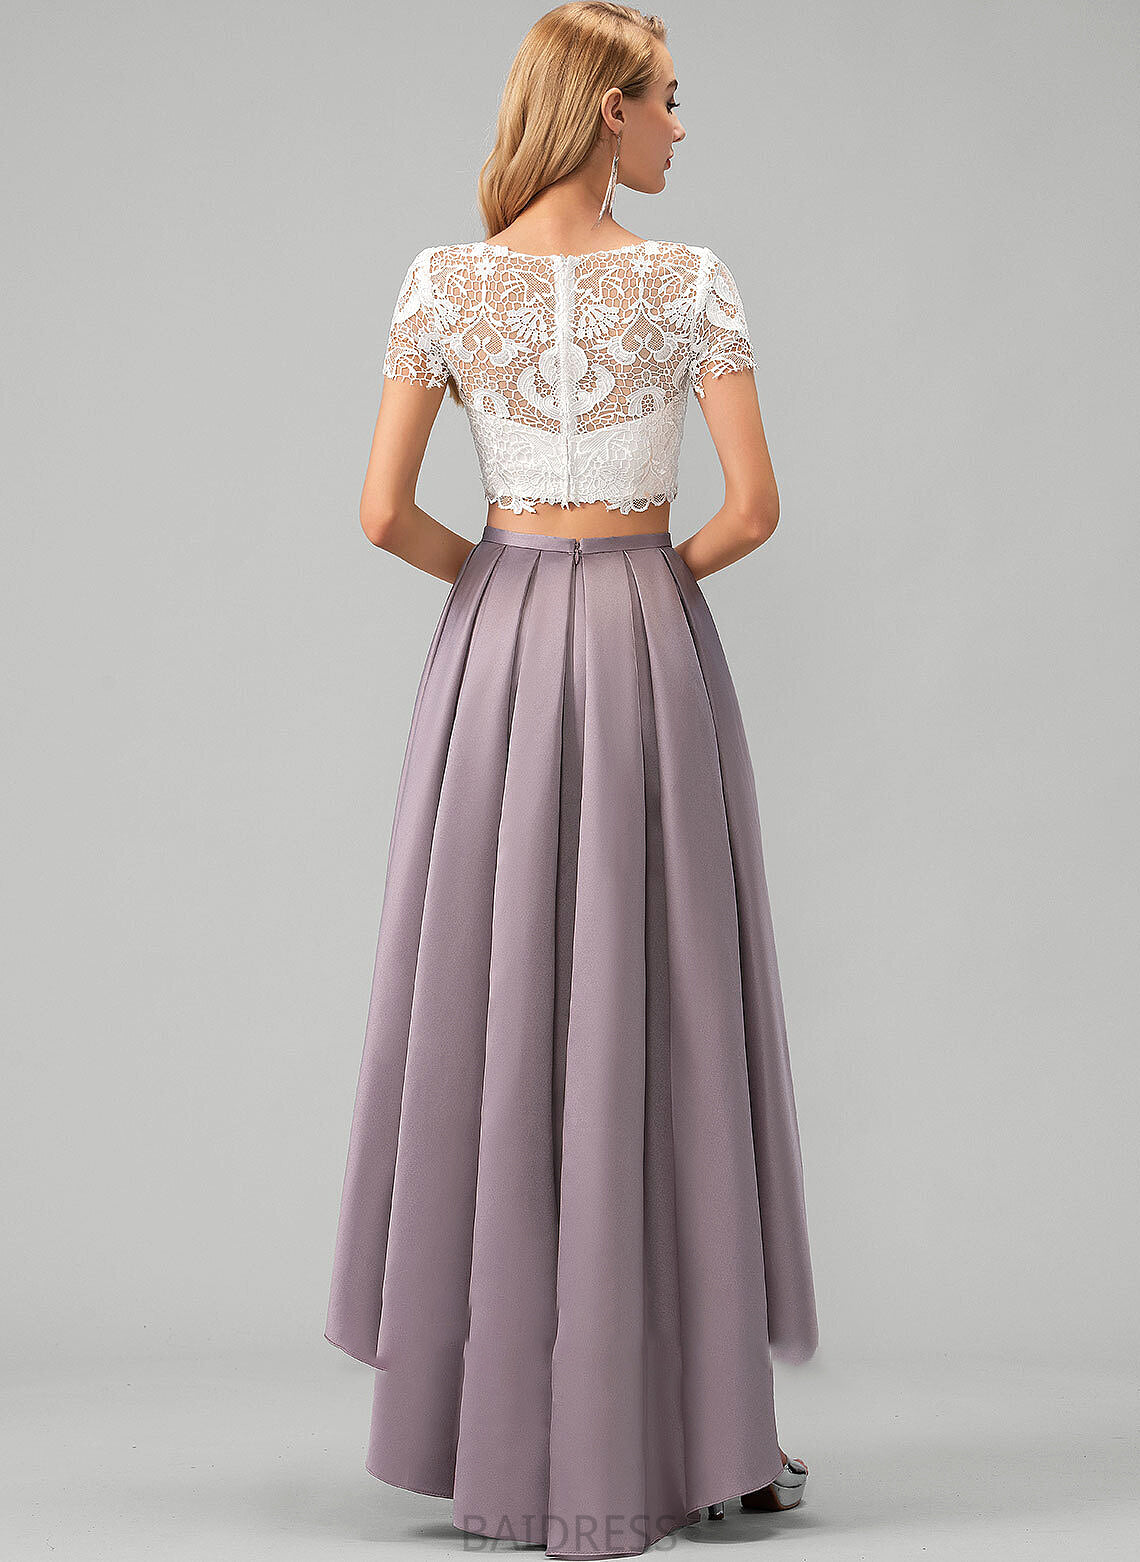 Asymmetrical With Satin Lace Prom Dresses Neck Scoop Pockets Allisson A-Line